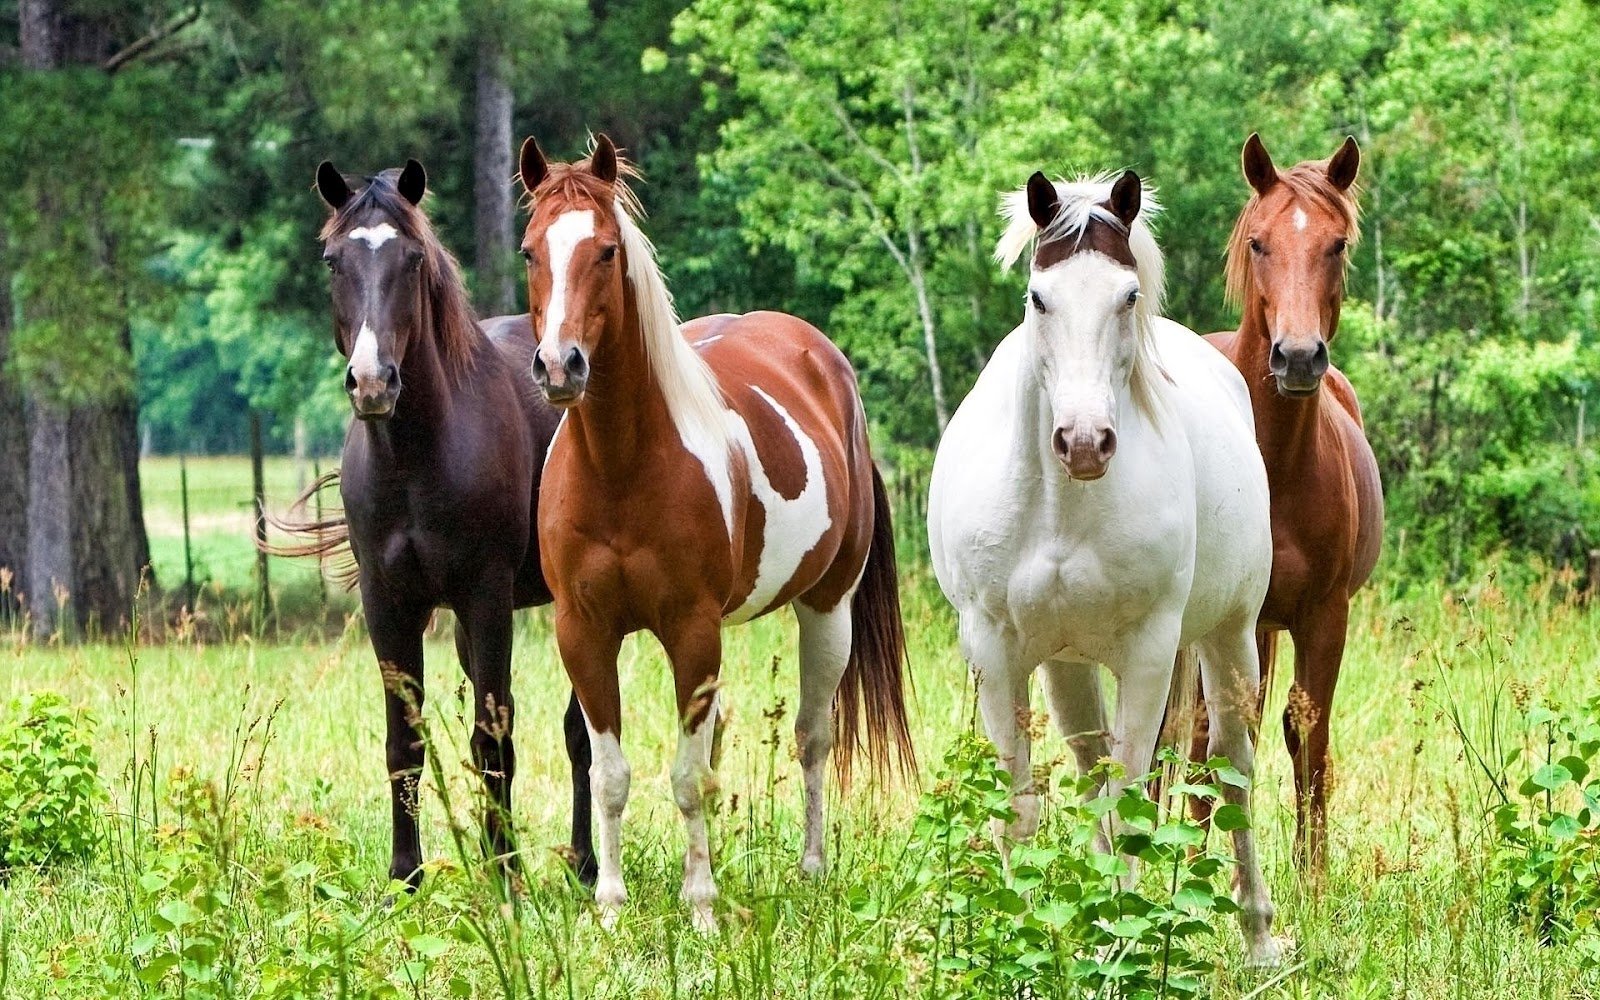 HD Animal Wallpaper With Four Horses In A Field